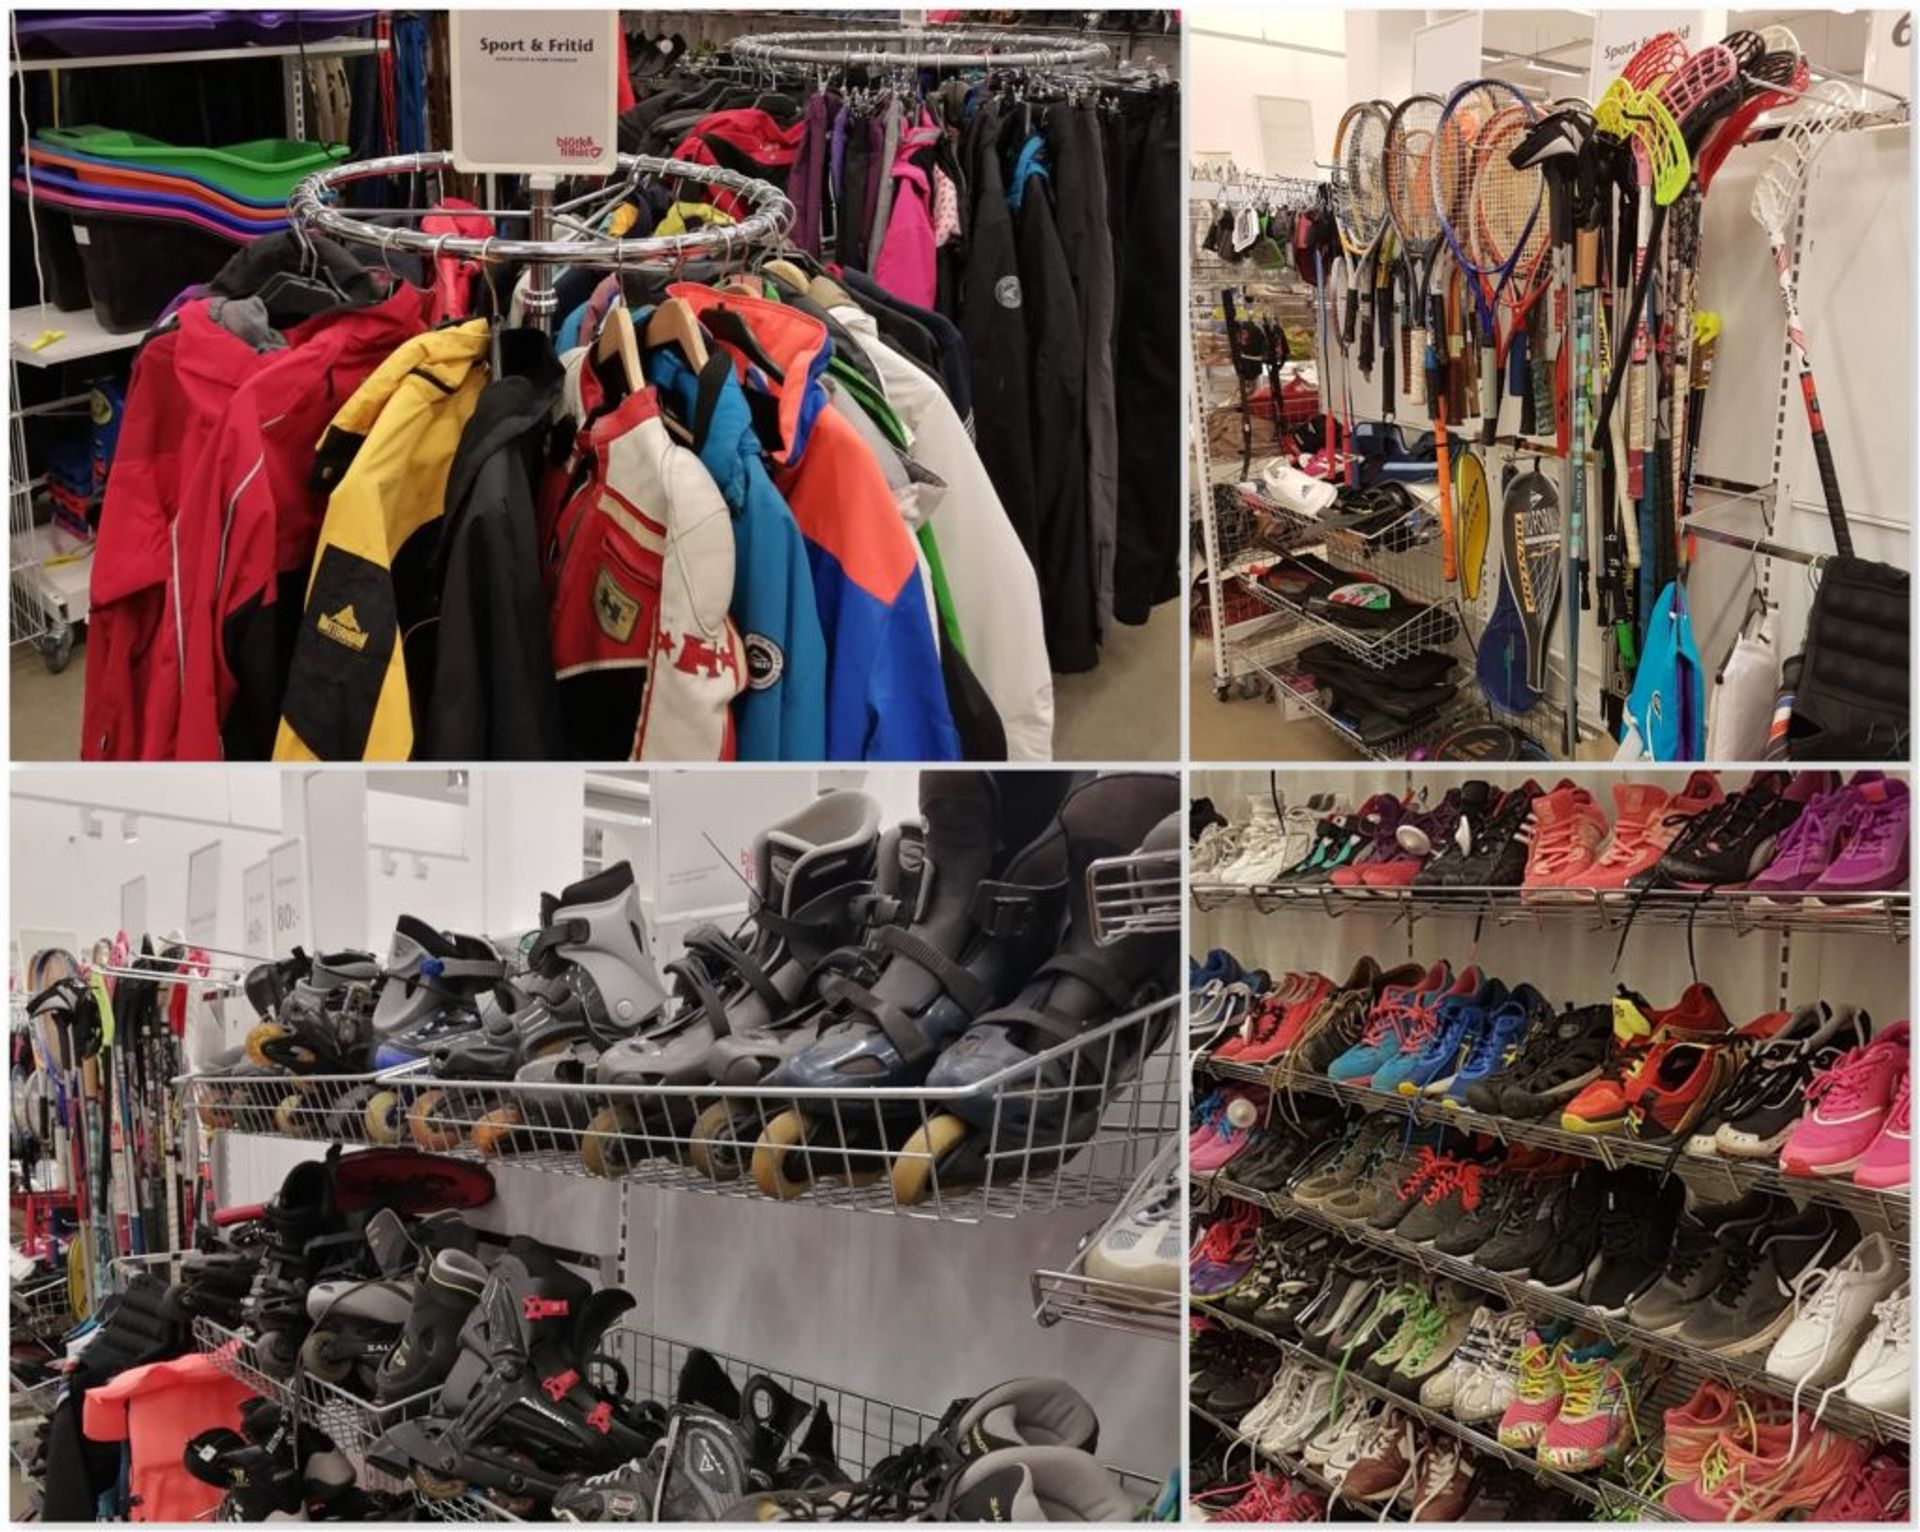 Racks of sports clothing, shoes and sporting equipment.